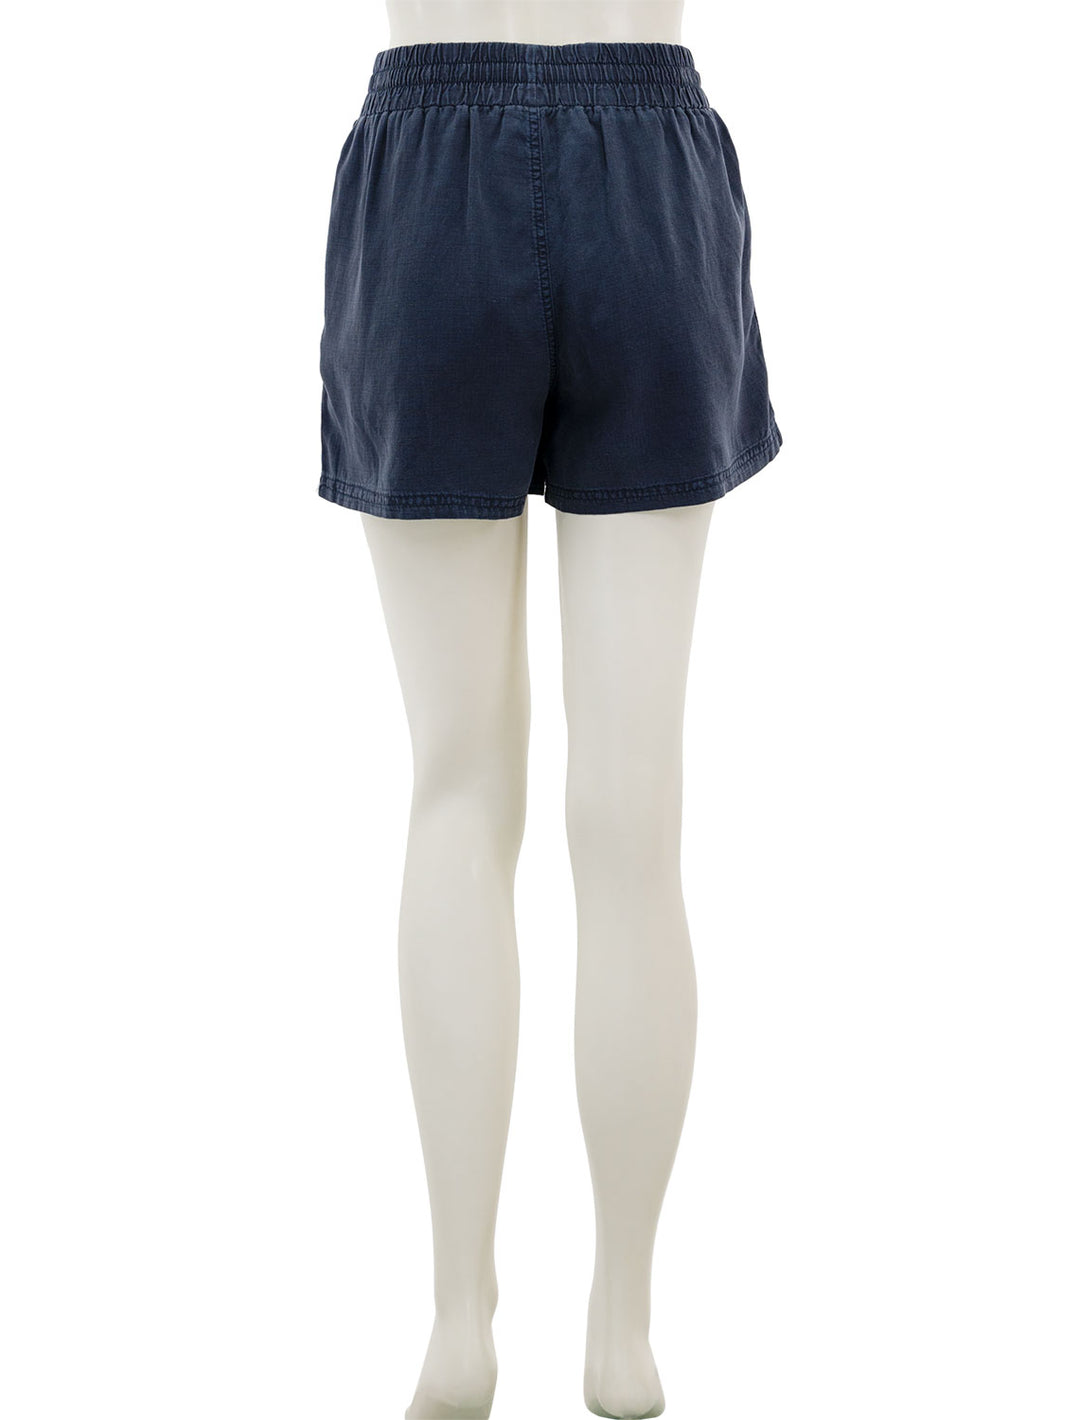 Back view of Splendid's campside shorts in navy.